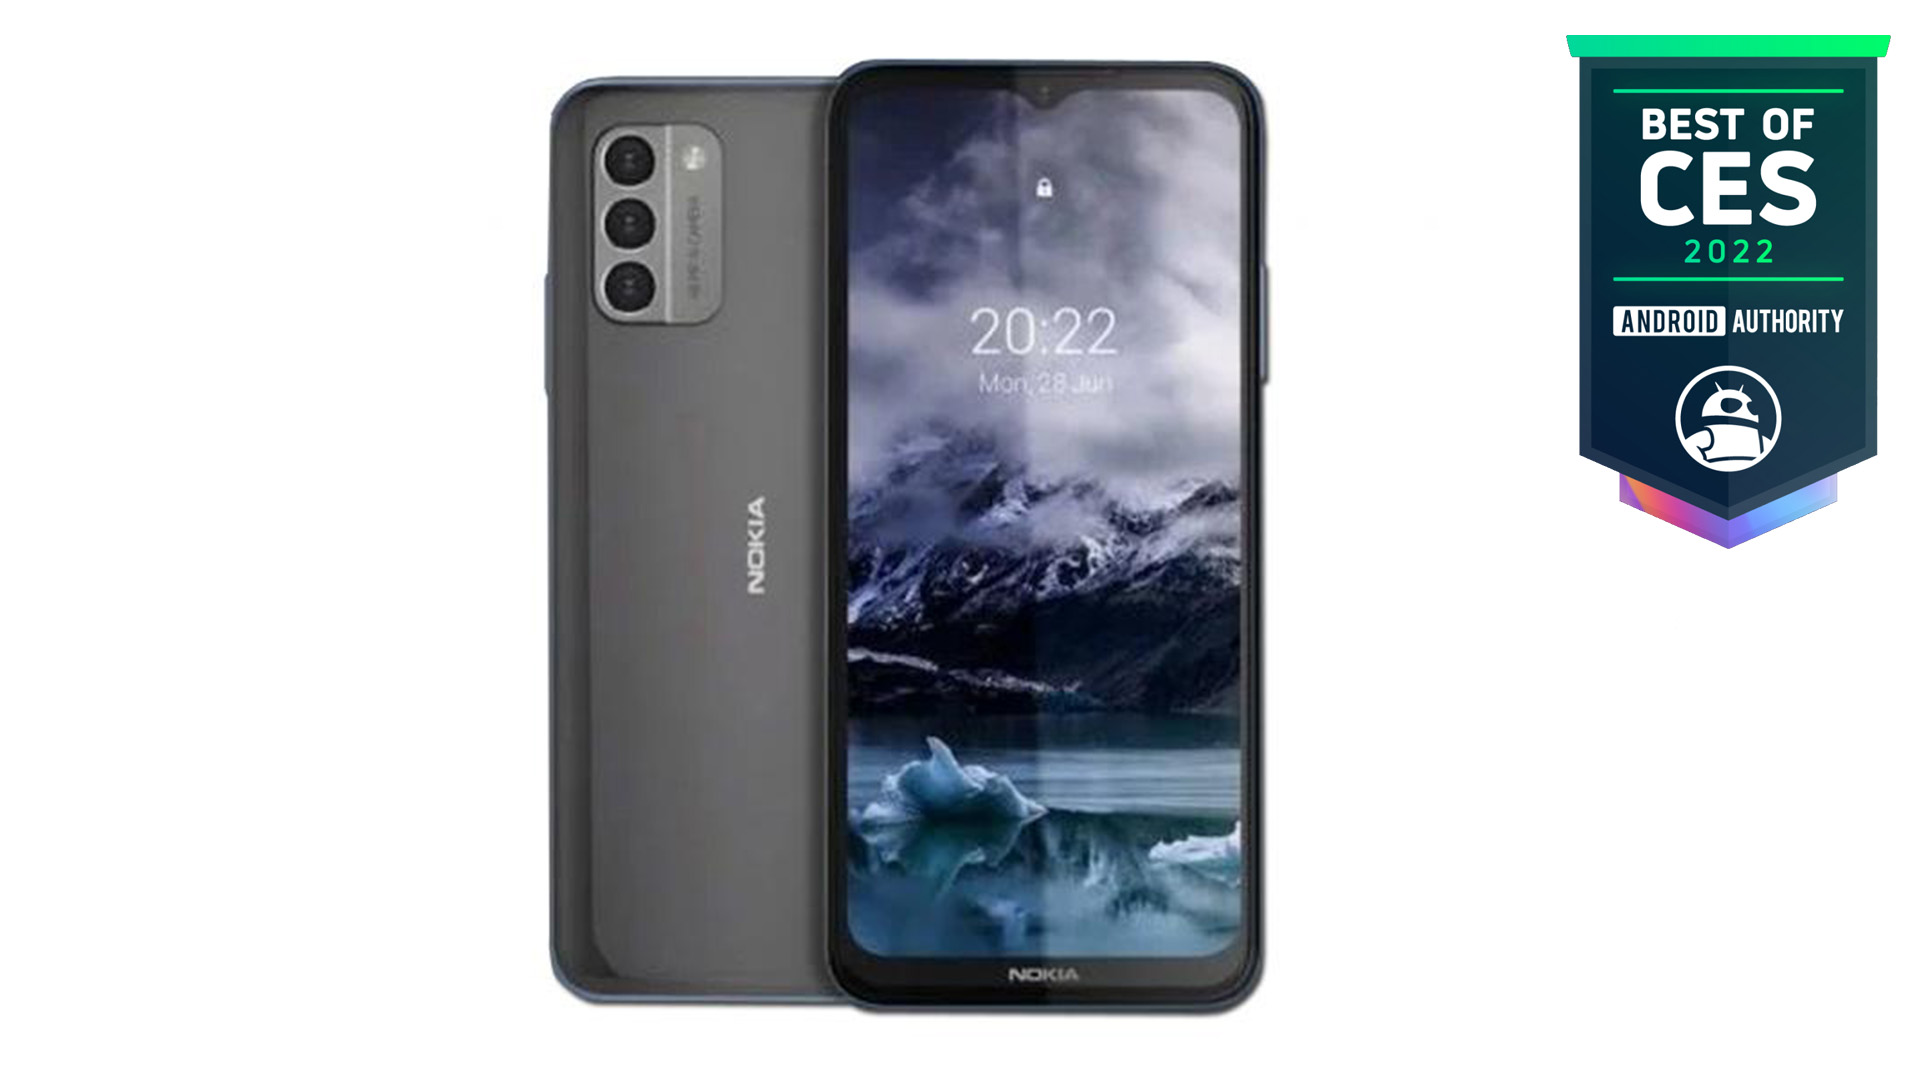 Nokia G400 Android Authority Best of CES 2022 Award winner